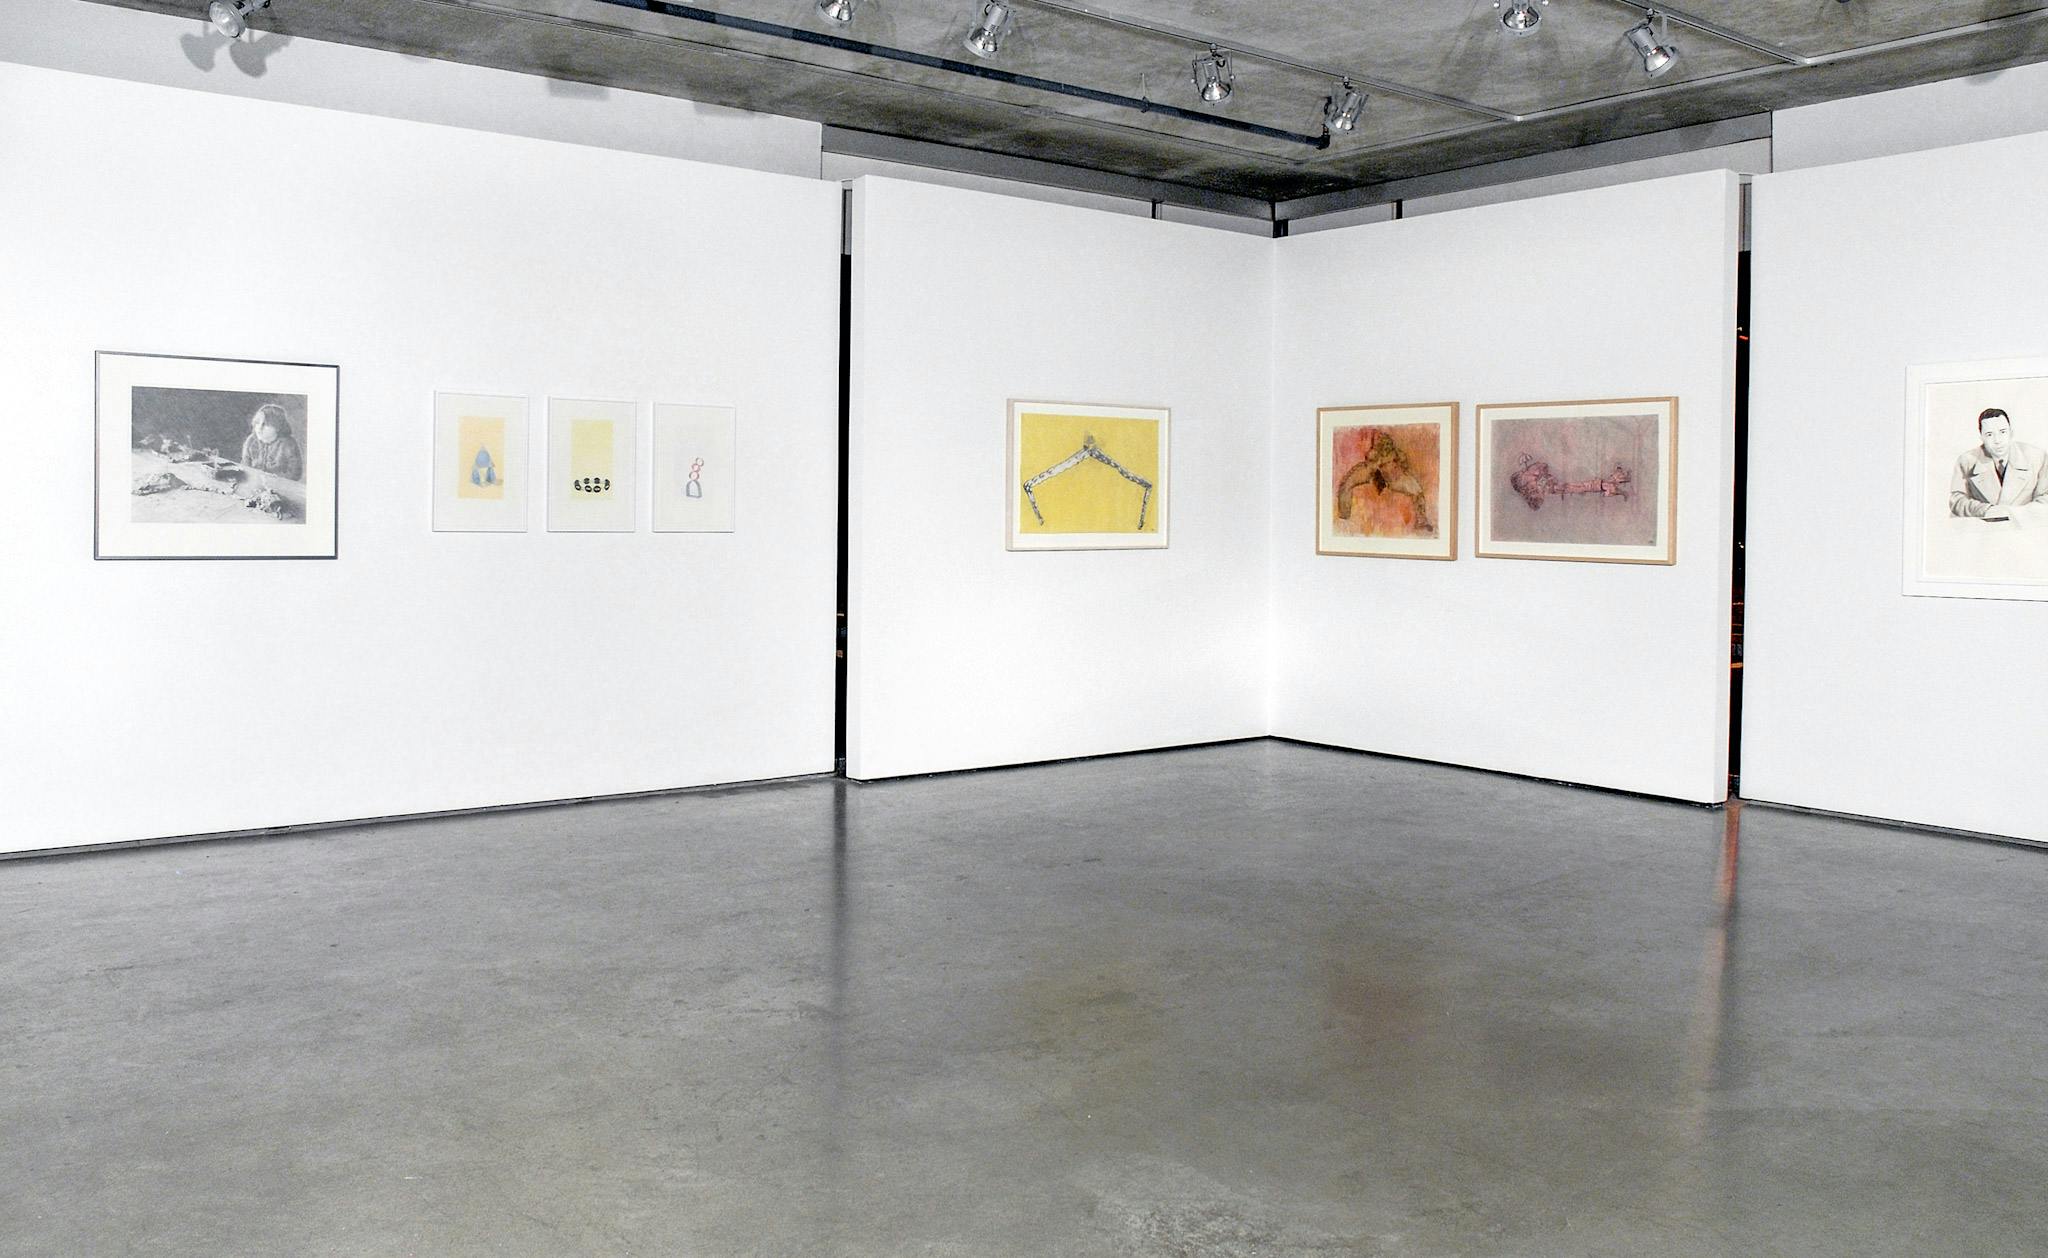 Three separation walls are placed inside a gallery. Various drawings are mounted on those walls. Three of those are figurative abstract paintings. There are two black and white human drawings. 